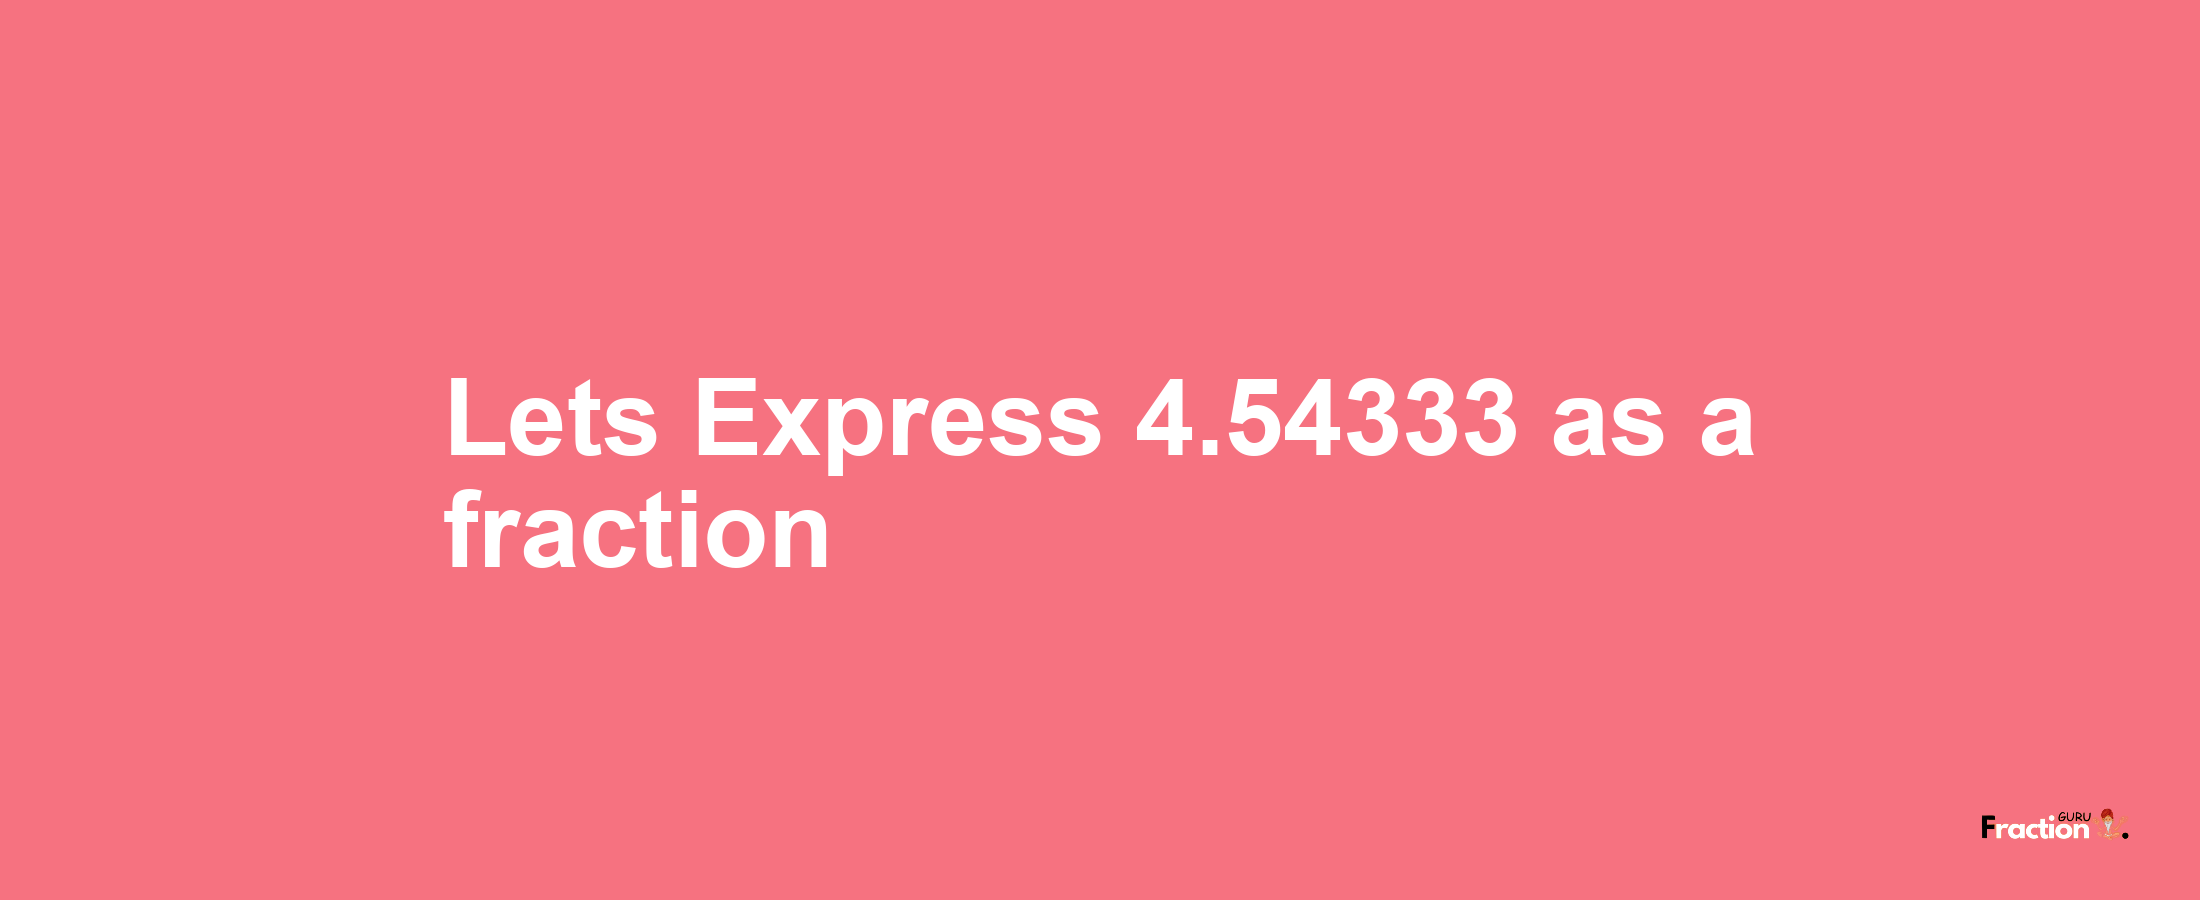 Lets Express 4.54333 as afraction